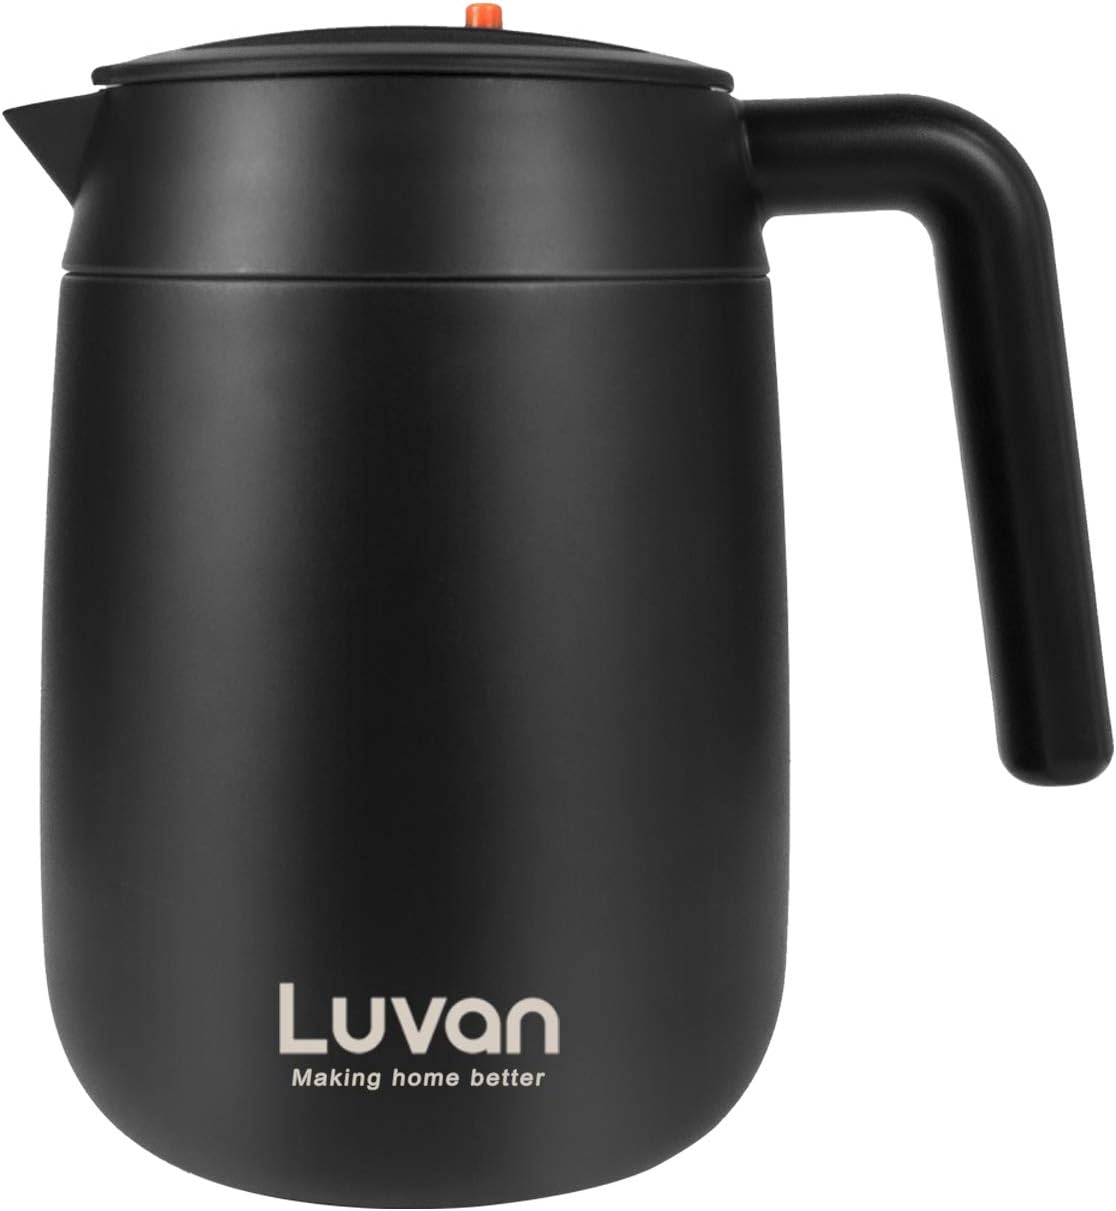 Luvan 304 18/10 Stainless Steel Thermal Carafe,34 oz (1 Liter) Double Walled Vacuum Insulated Coffee Pot with Red Lock Button Top,12+